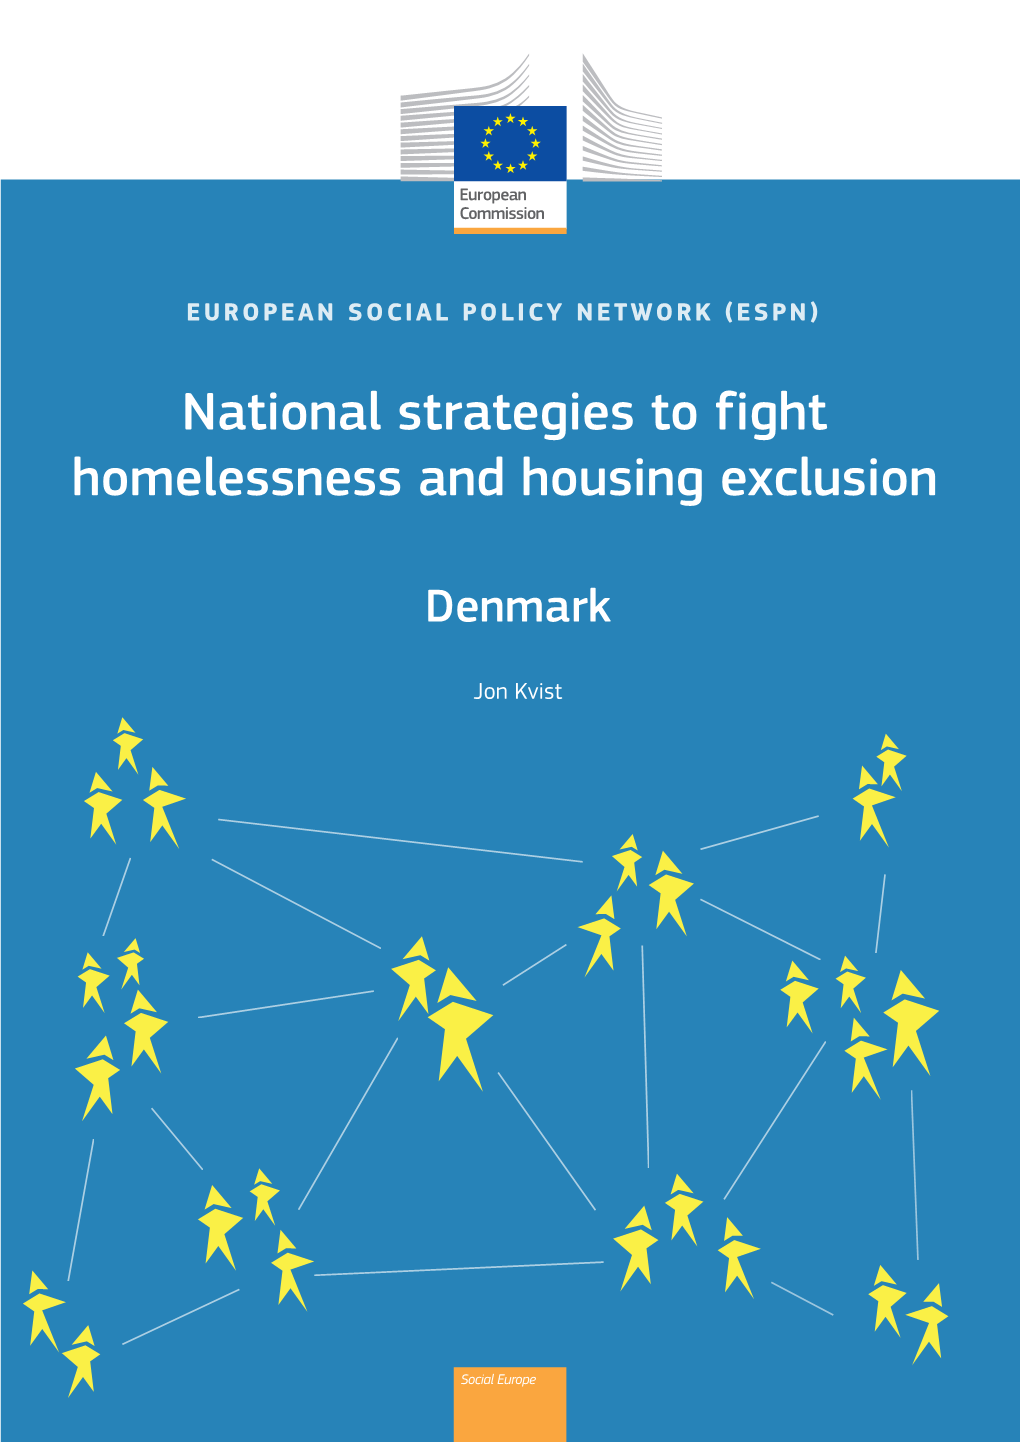 ESPN Thematic Report on National Strategies to Fight Homelessness and Housing Exclusion